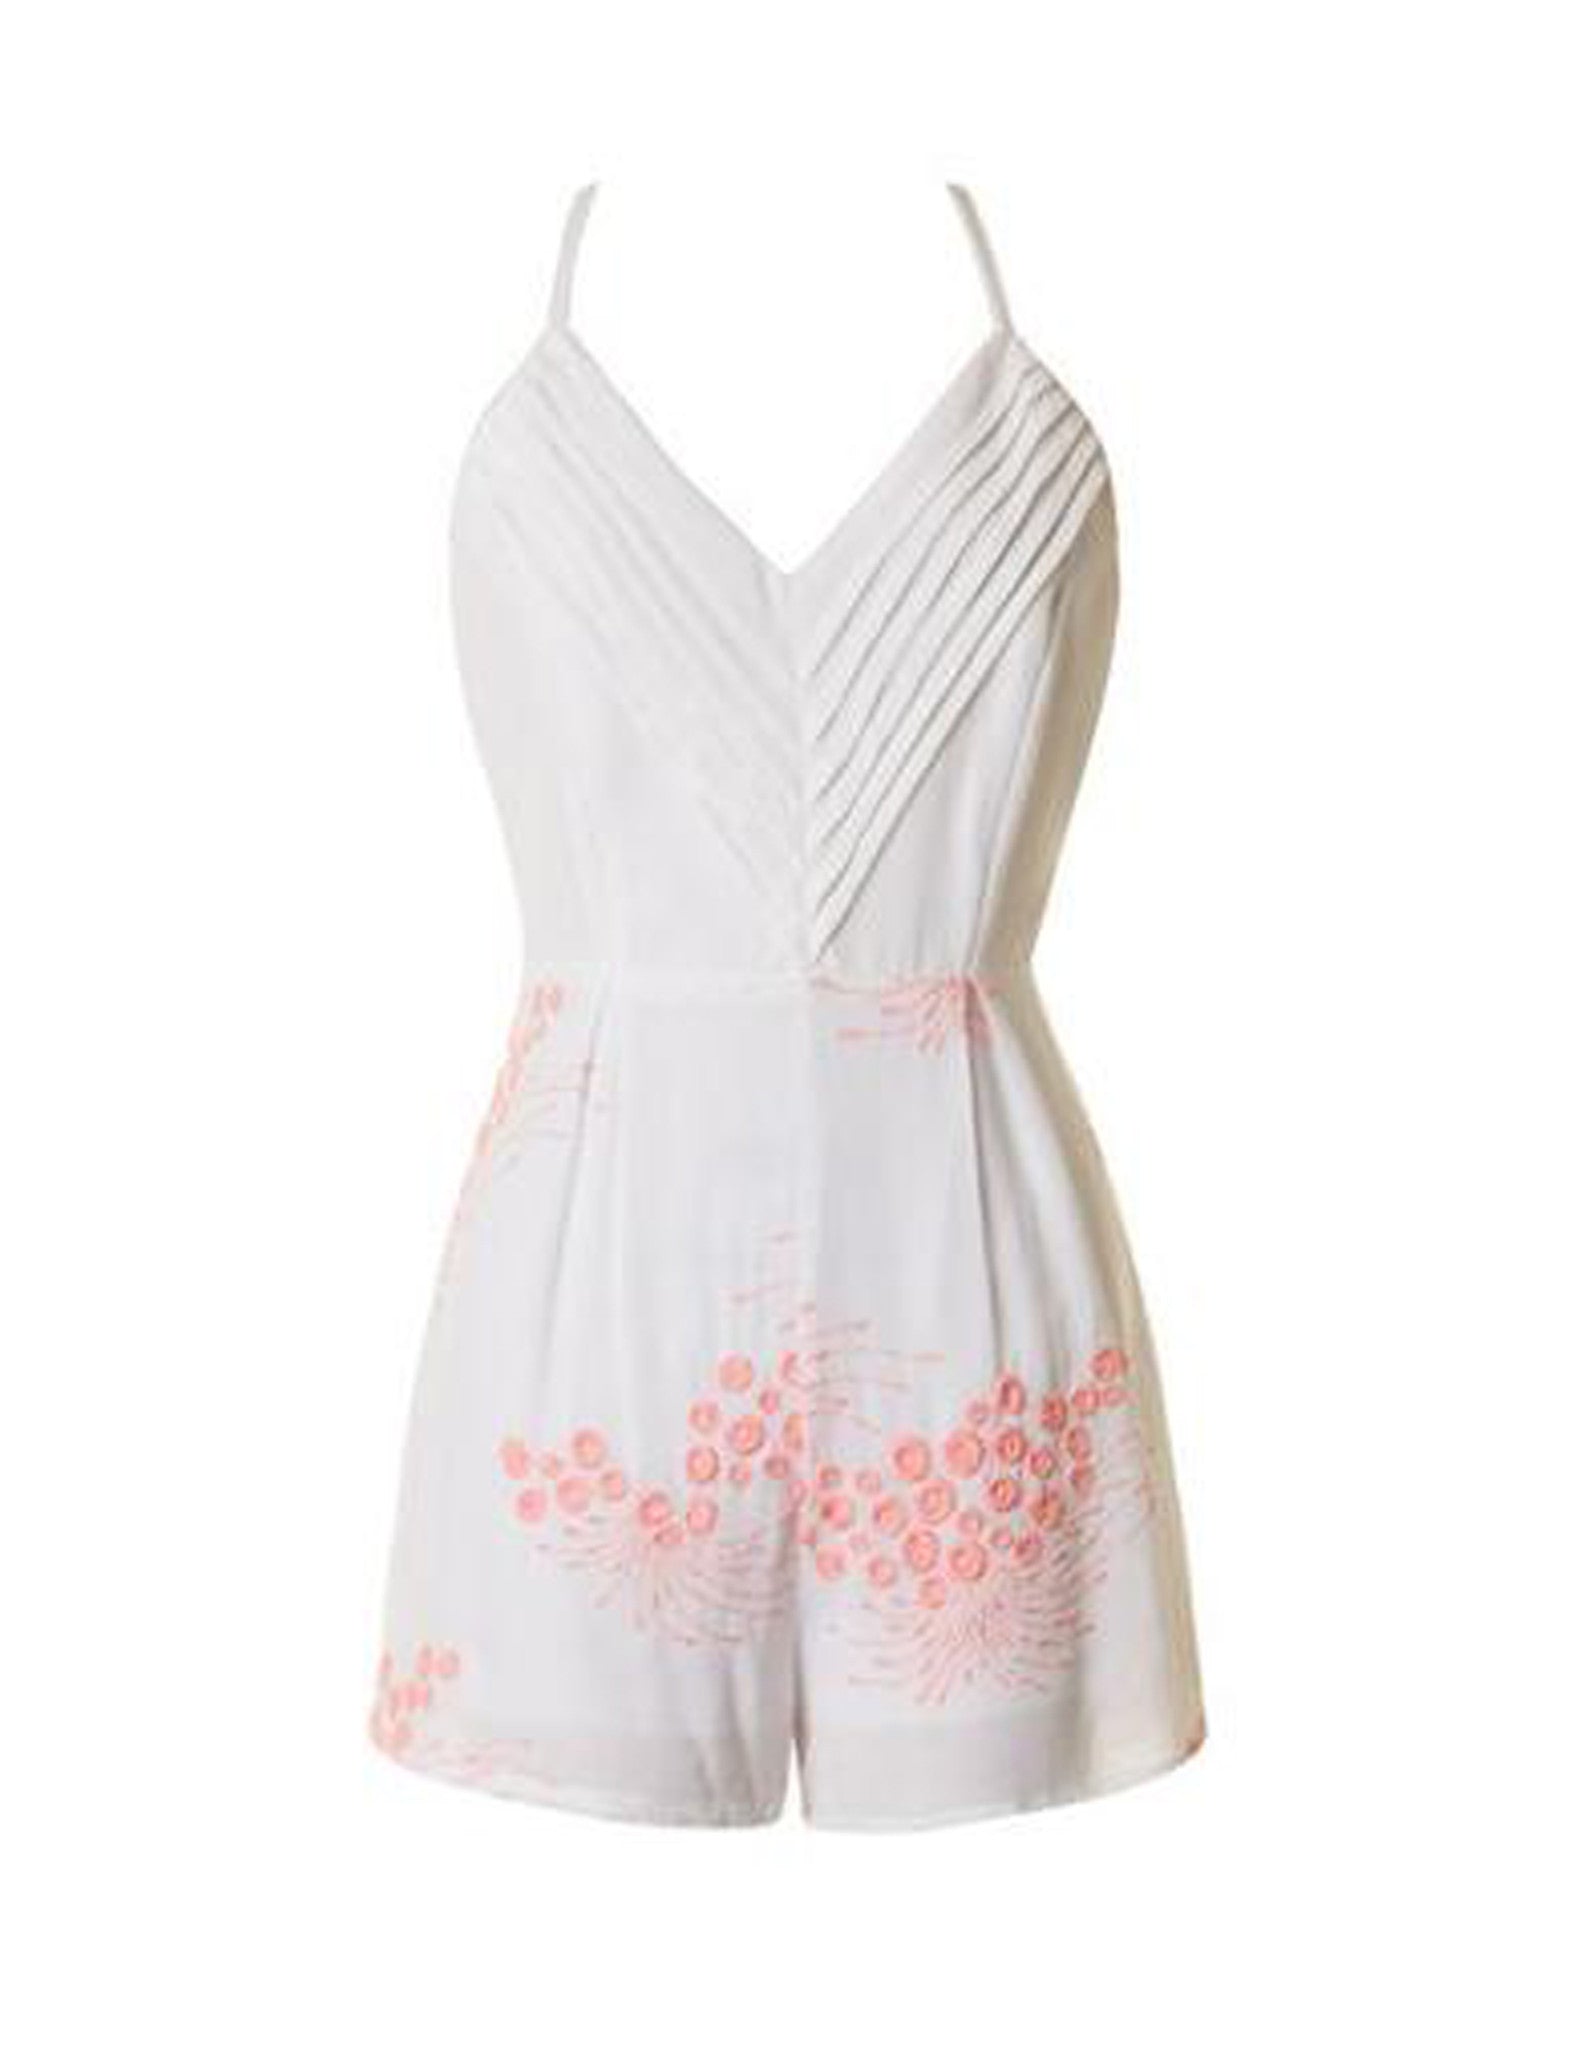 Summer White Sleeveless Romper with Pink Embroidery